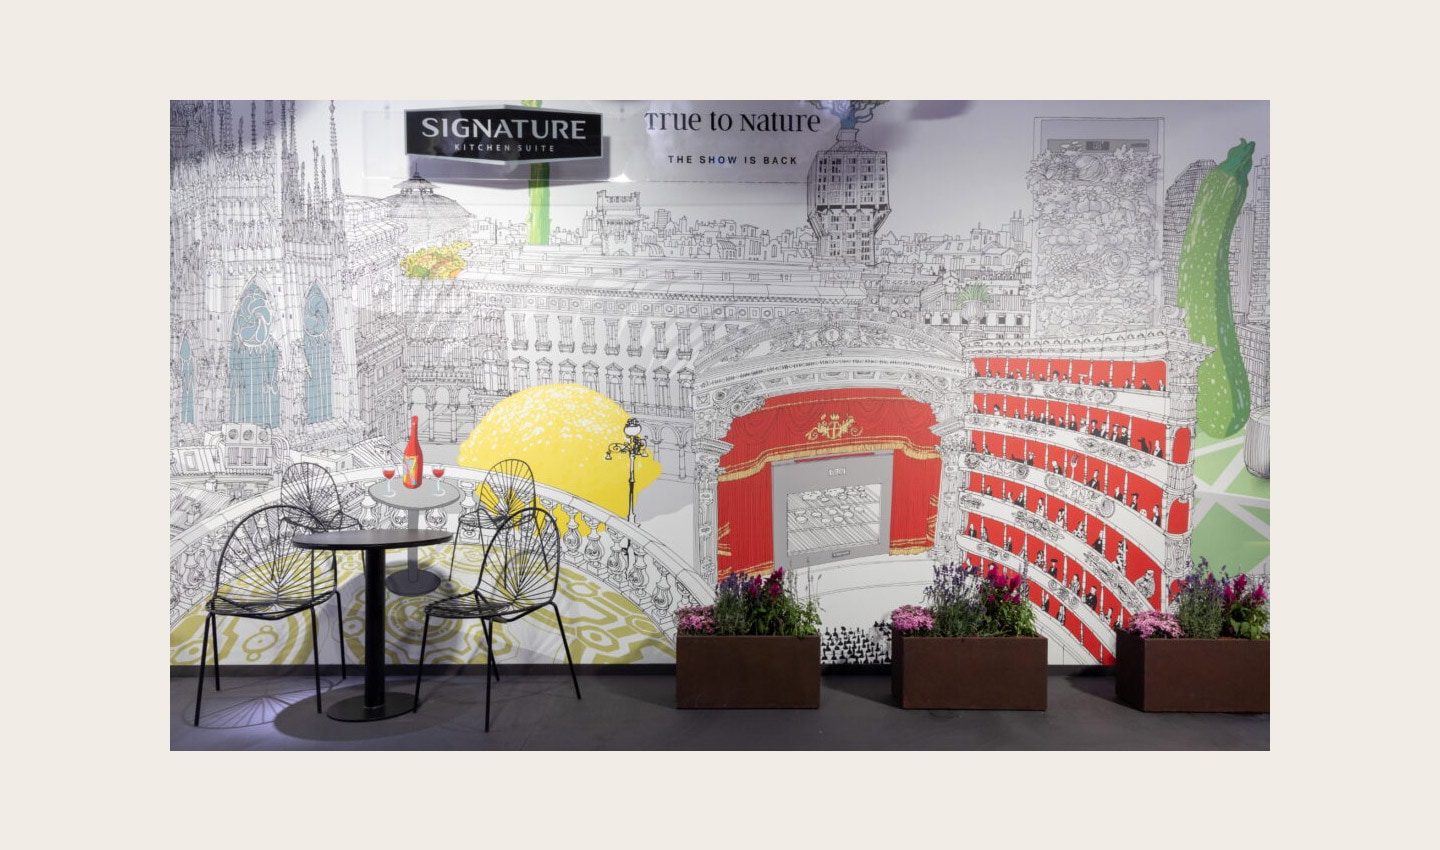 The art piece by Italian architect and illustrator, Carlo Stanga, is displayed at the Signature Kitchen Suite showroom in Piazza Cavour, Milan, Italy